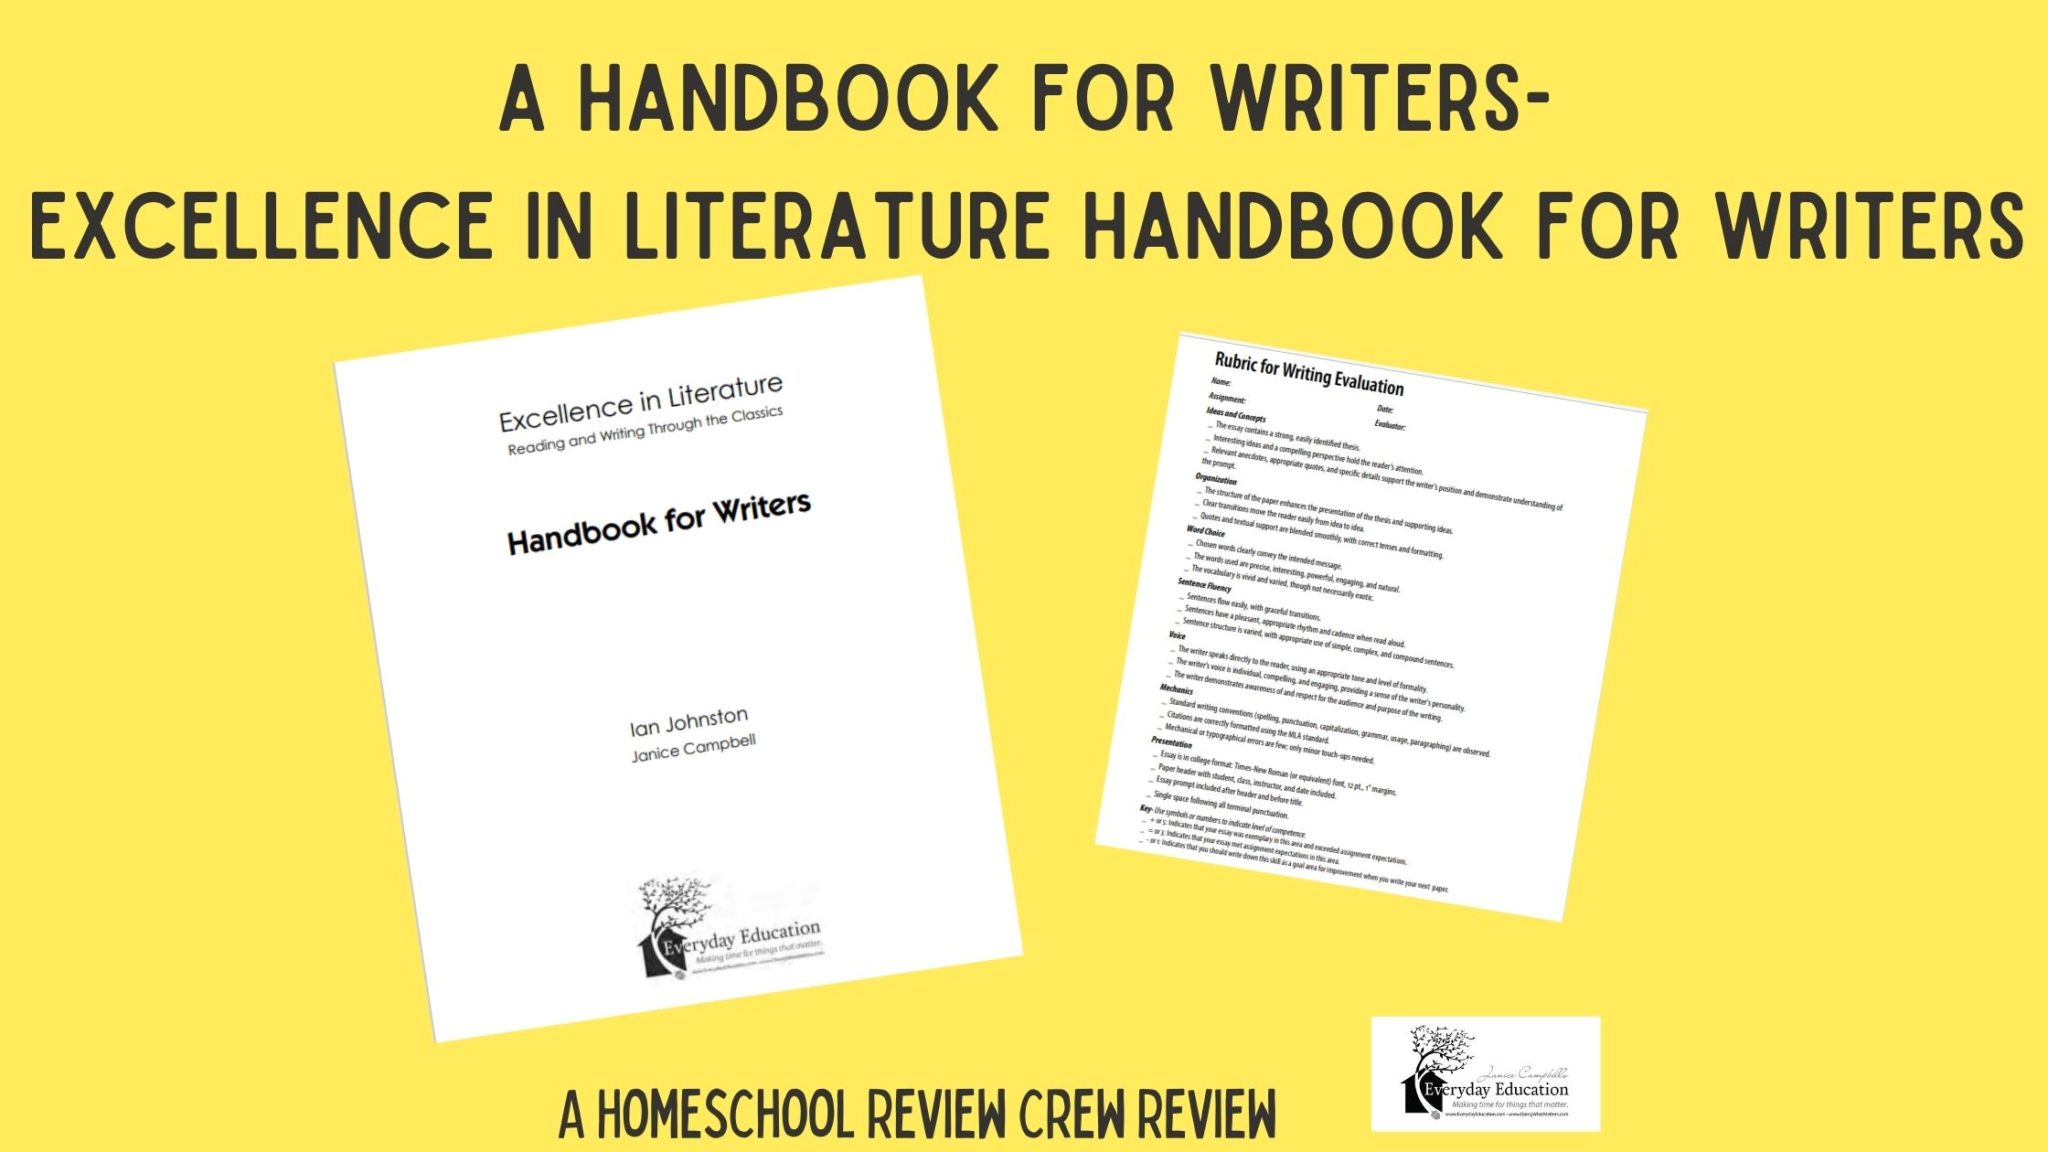 You are currently viewing A Handbook for Writers- Excellence in Literature Handbook for Writers Review